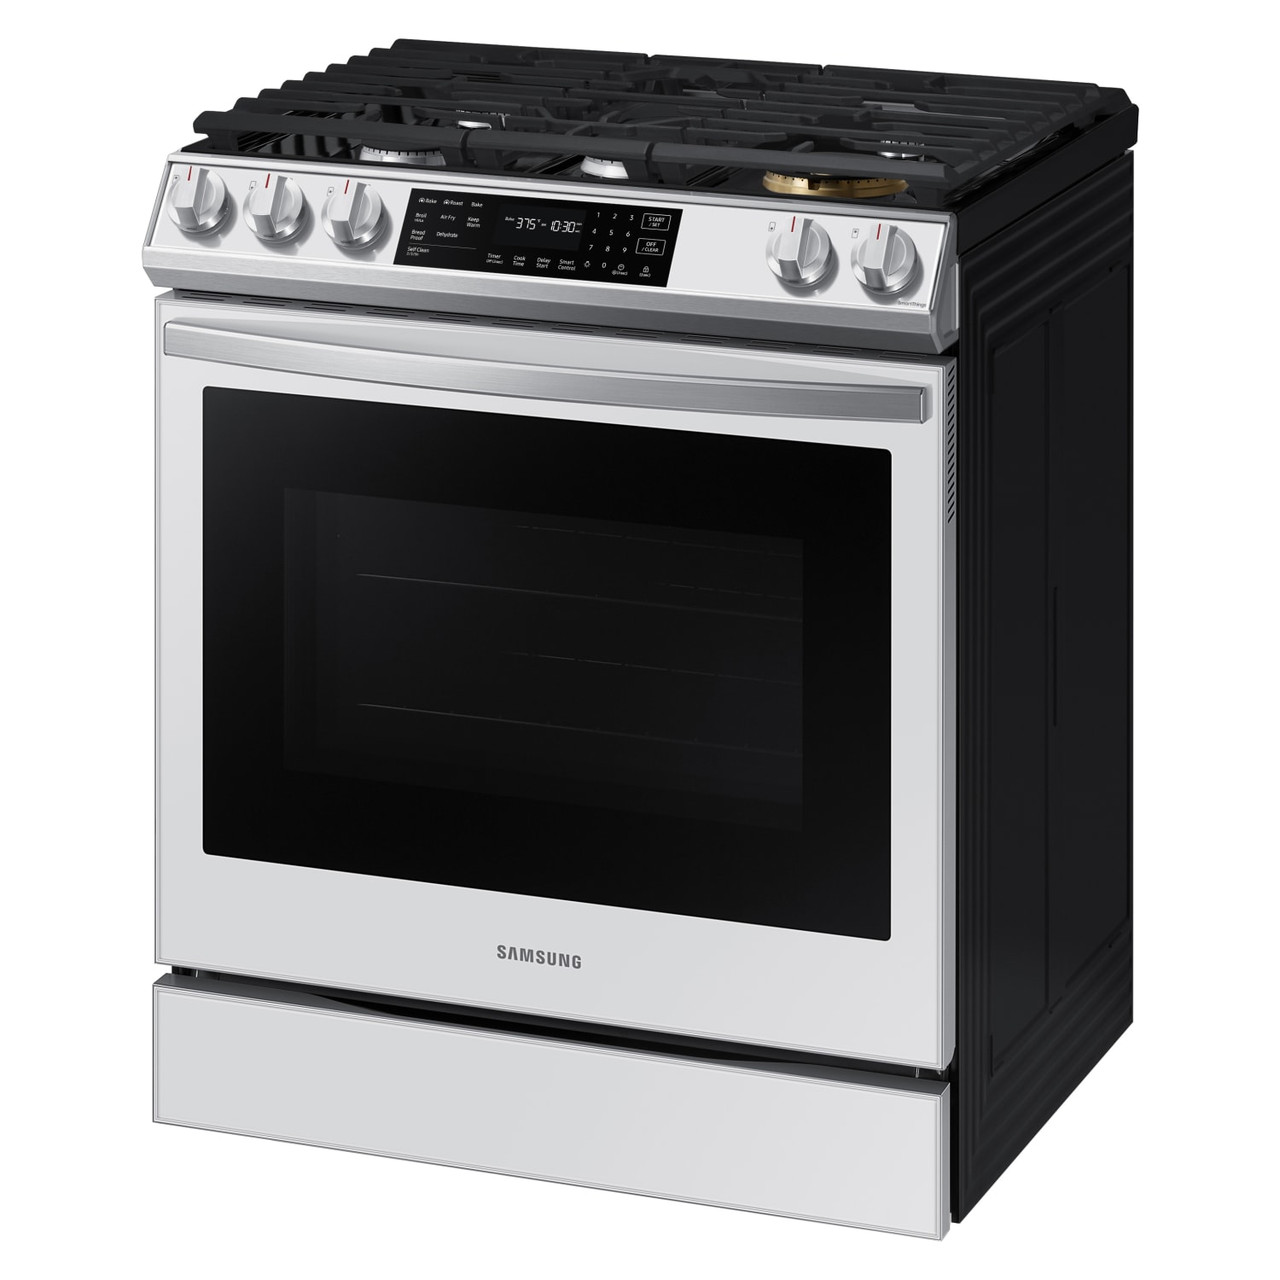 Samsung BESPOKE 6.0 cu. ft. Smart Slide-in Gas Range with Air Fry - White Glass